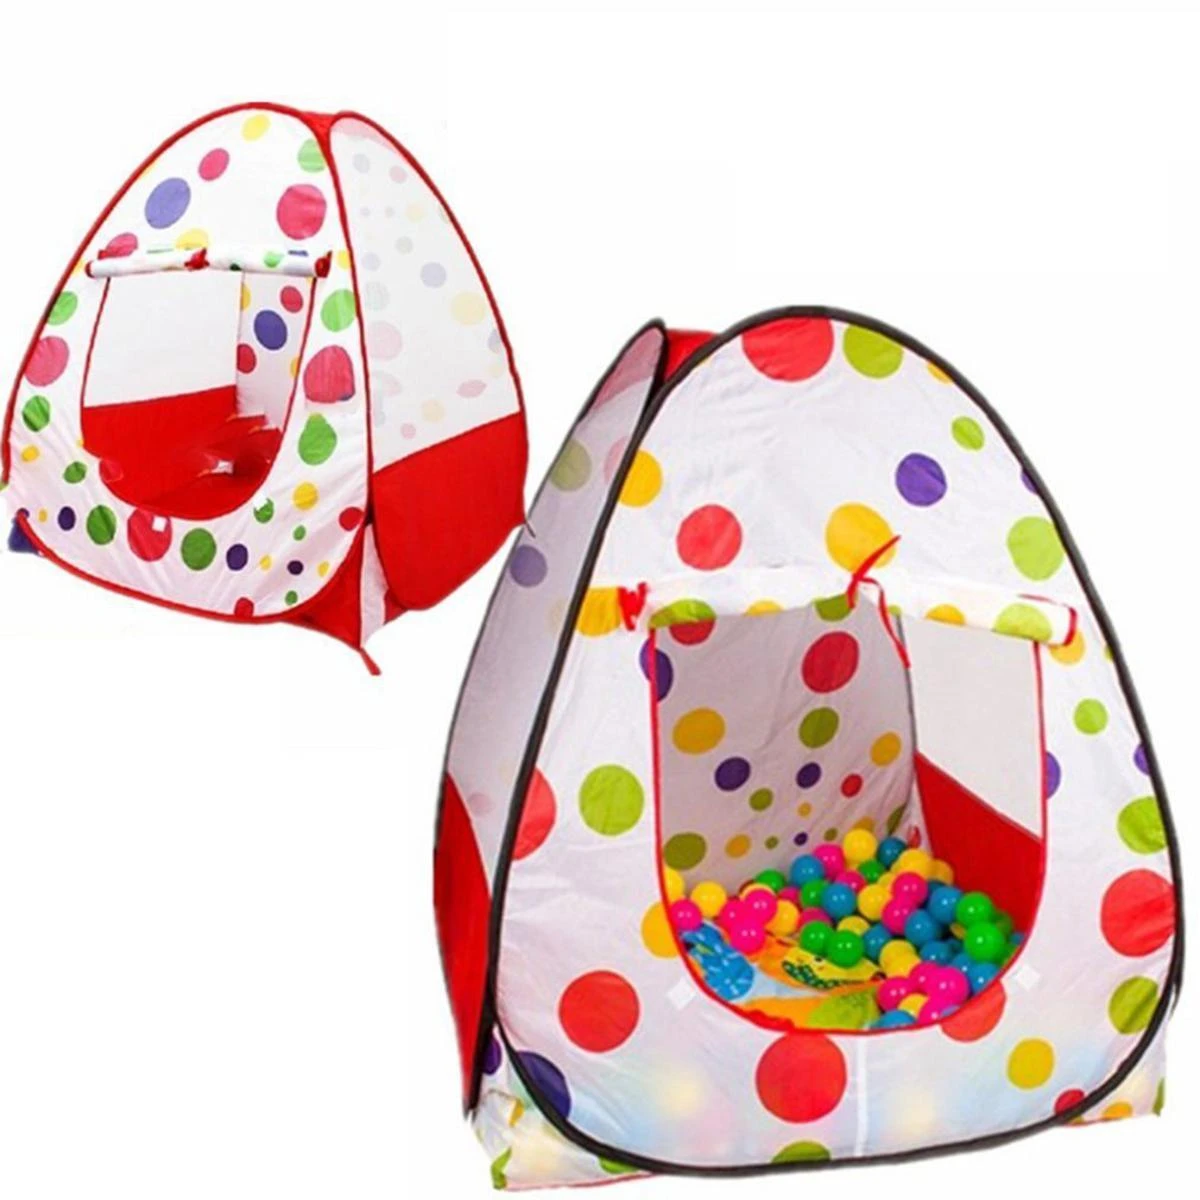 Tent Play House Toy With 50 Ball Set for Kids- Multicolor